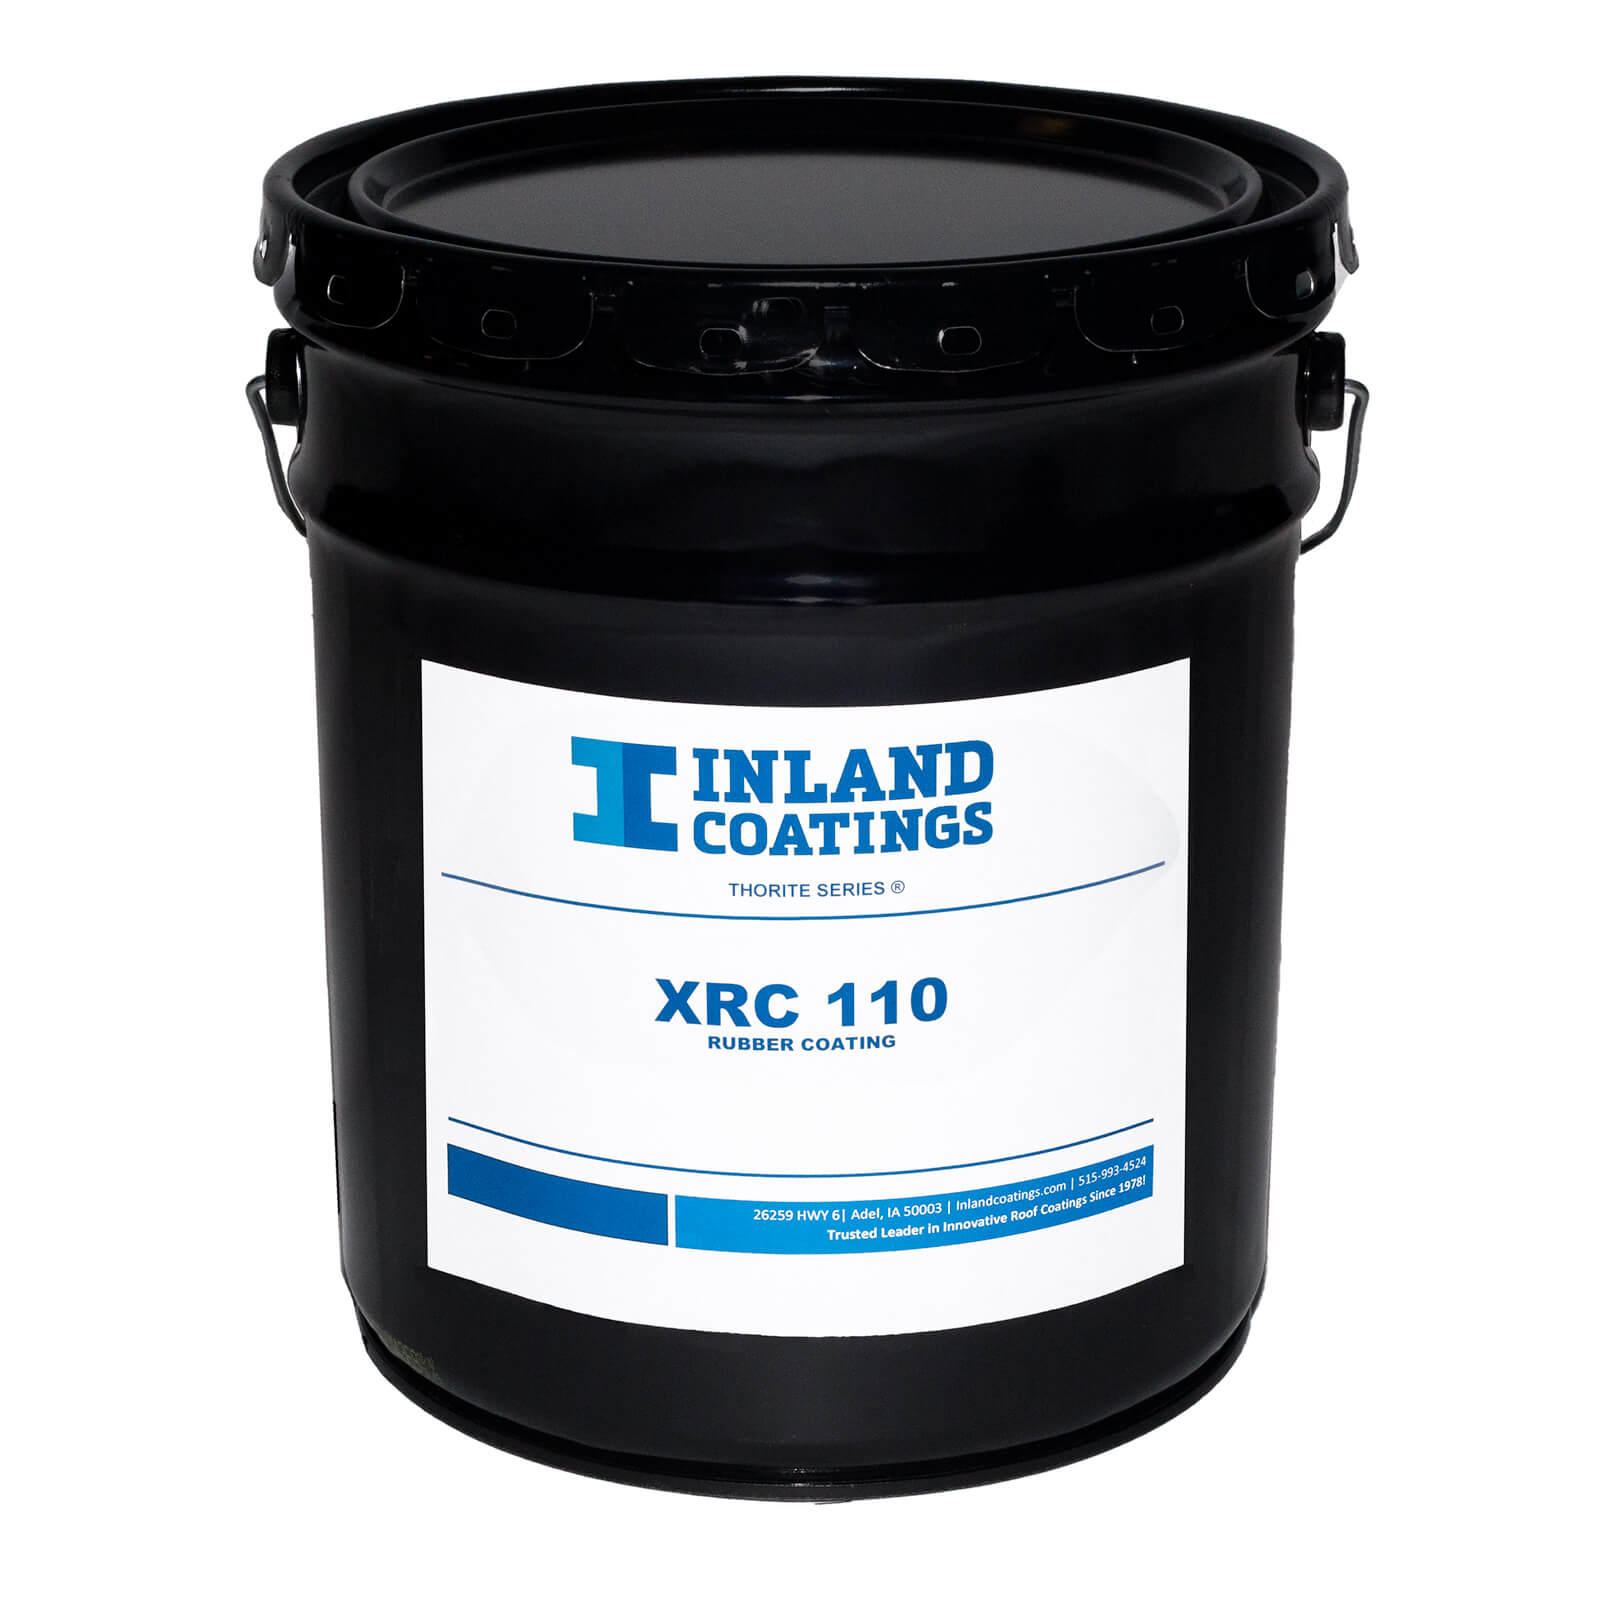 A bucket of Inland's XRC-110 Thorite Series Rubber Coating